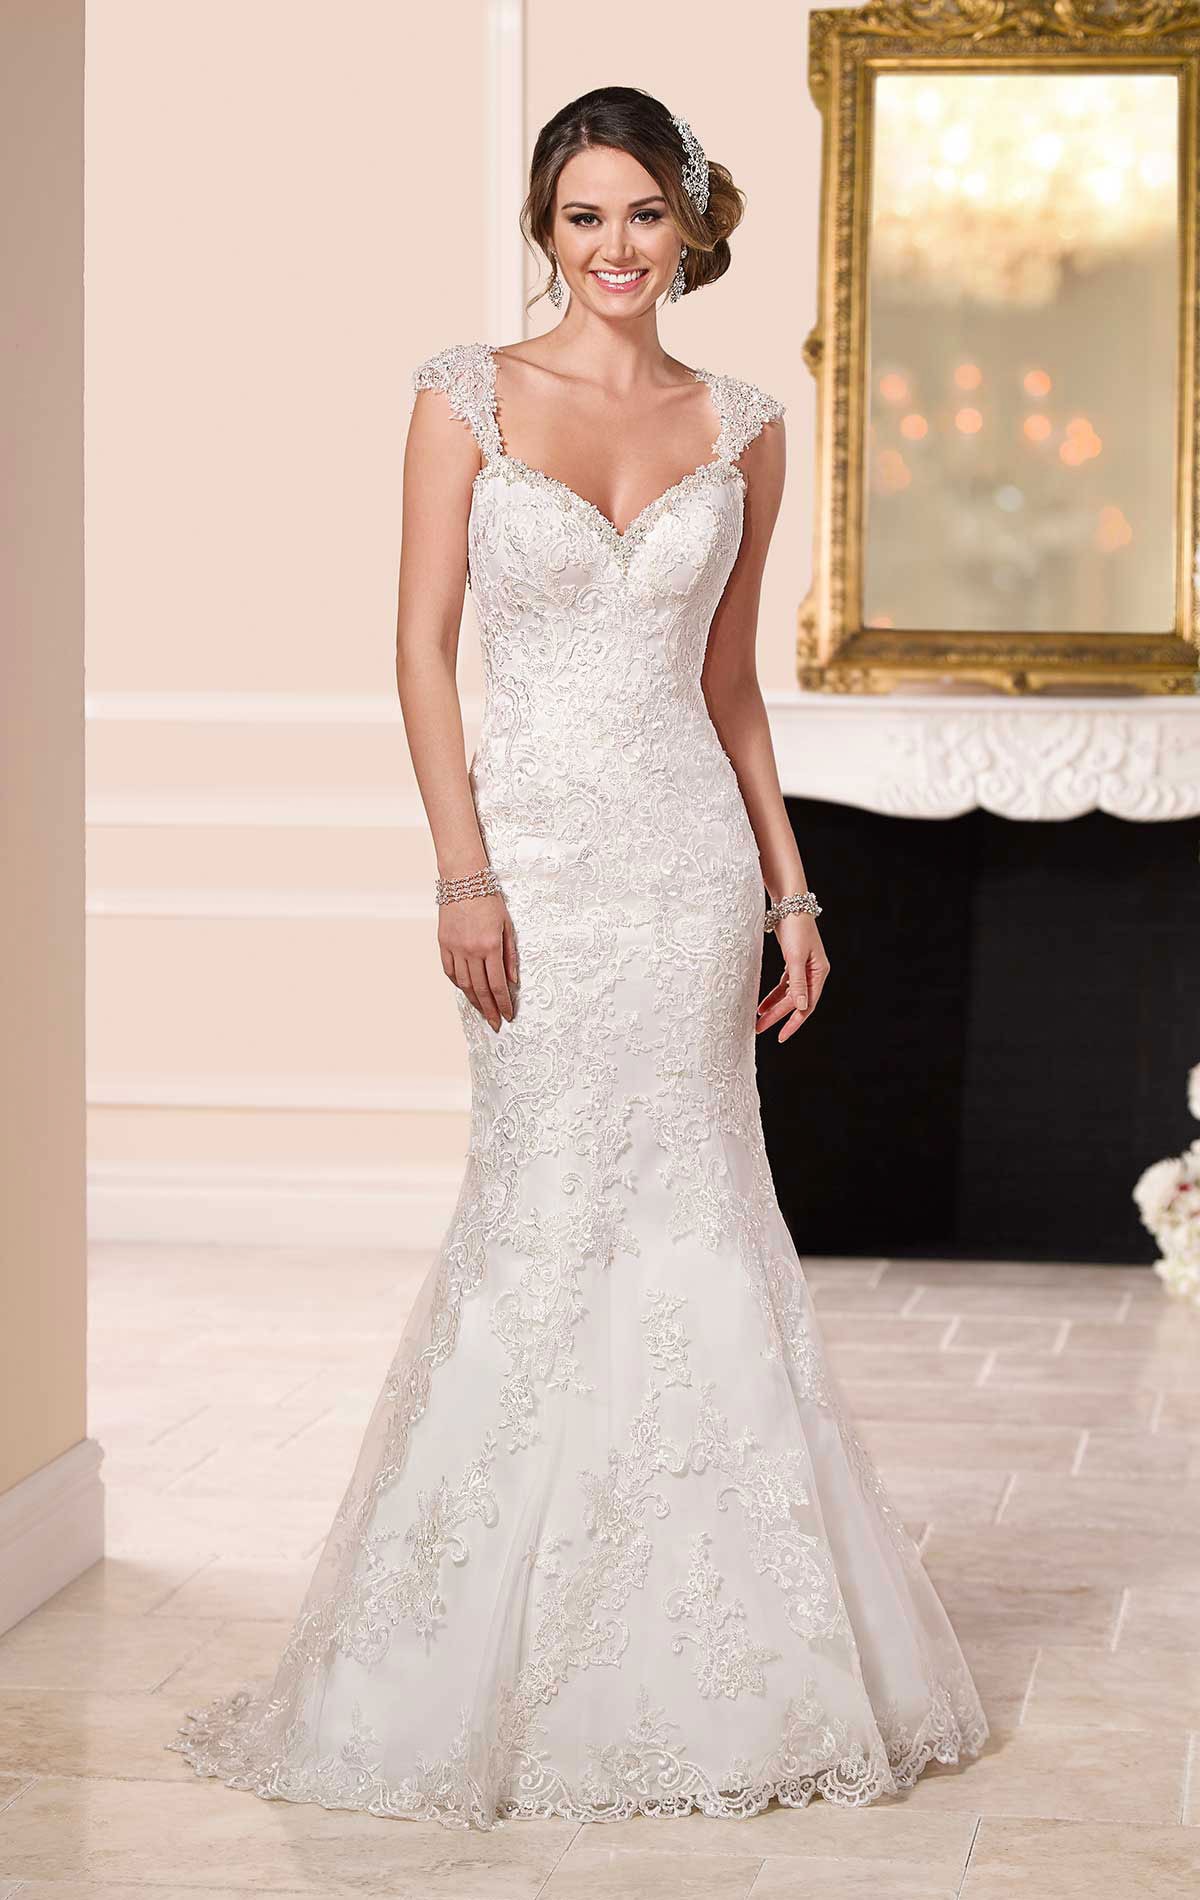 Isadora - Sold - Stella York 6105 1920's look fit and flare beaded lace wedding dress with crystal & diamanté beaded sweetheart neckline & beaded cap sleeve shoulder strap & low back. Sample Dress Now Reduced at Blessings of Brighton Wedding Dress Sample Sale, BN1 5GG. Telephone: 01273 505766. Stella York 6025 Blush Pink slim A-line wedding dress with Tulle skirt and fitted Lace strapless bodice at Blessings of Brighton, BN1 5GG. Telephone: 01273 505766. Blessings Bridal Shop is Situated off the A23/A27 in outer Brighton,  Free Easy Parking.